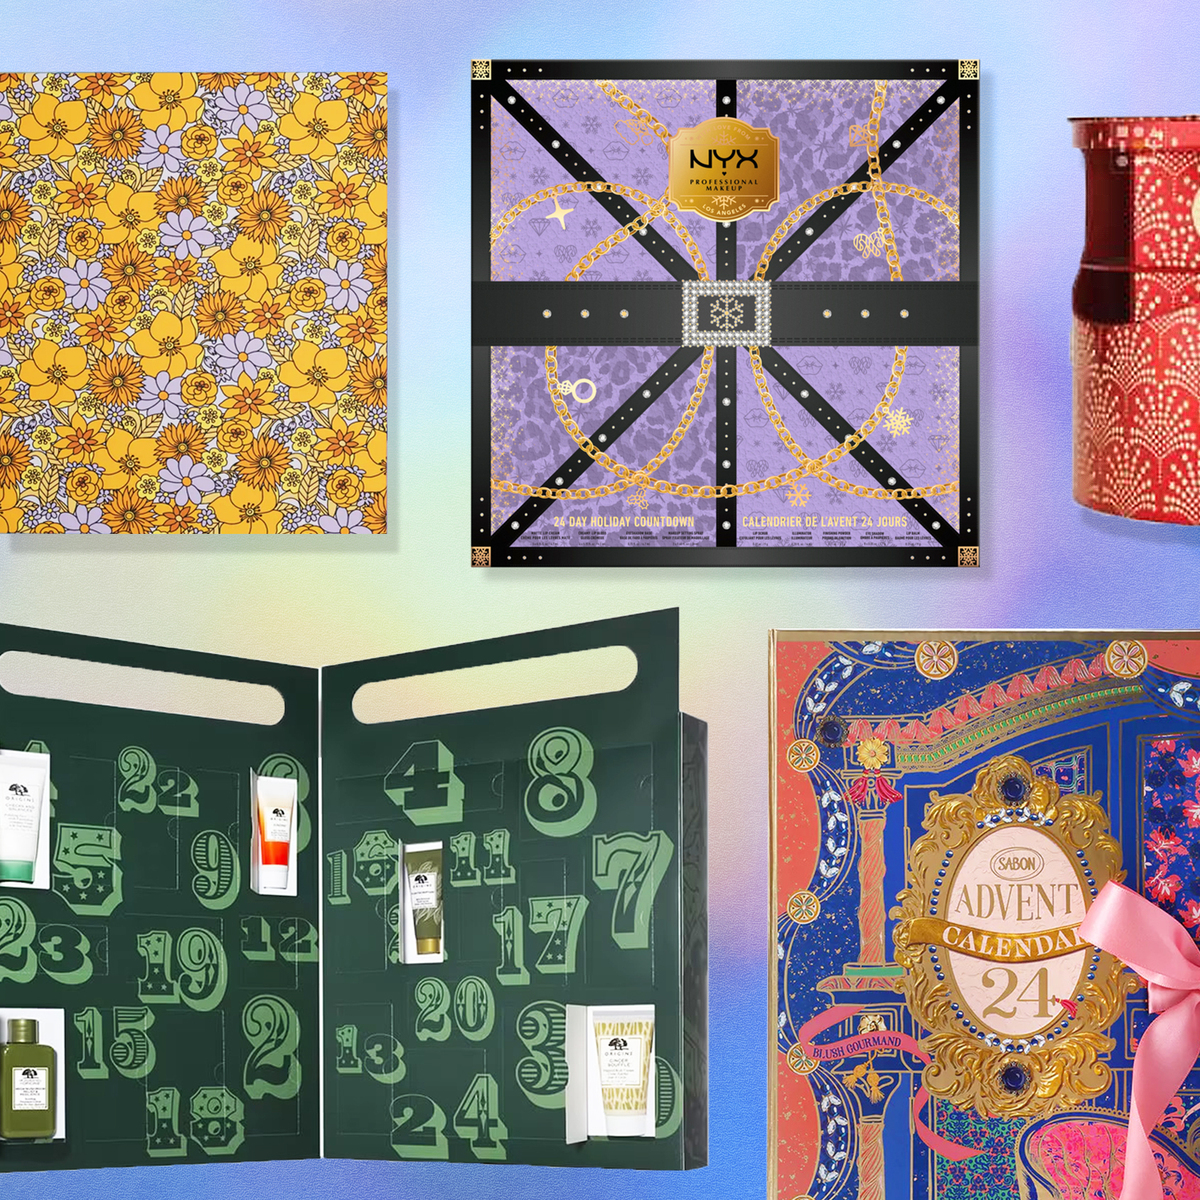 33 Best Beauty Advent Calendars of 2023—Shop Gorgeous Gifts That